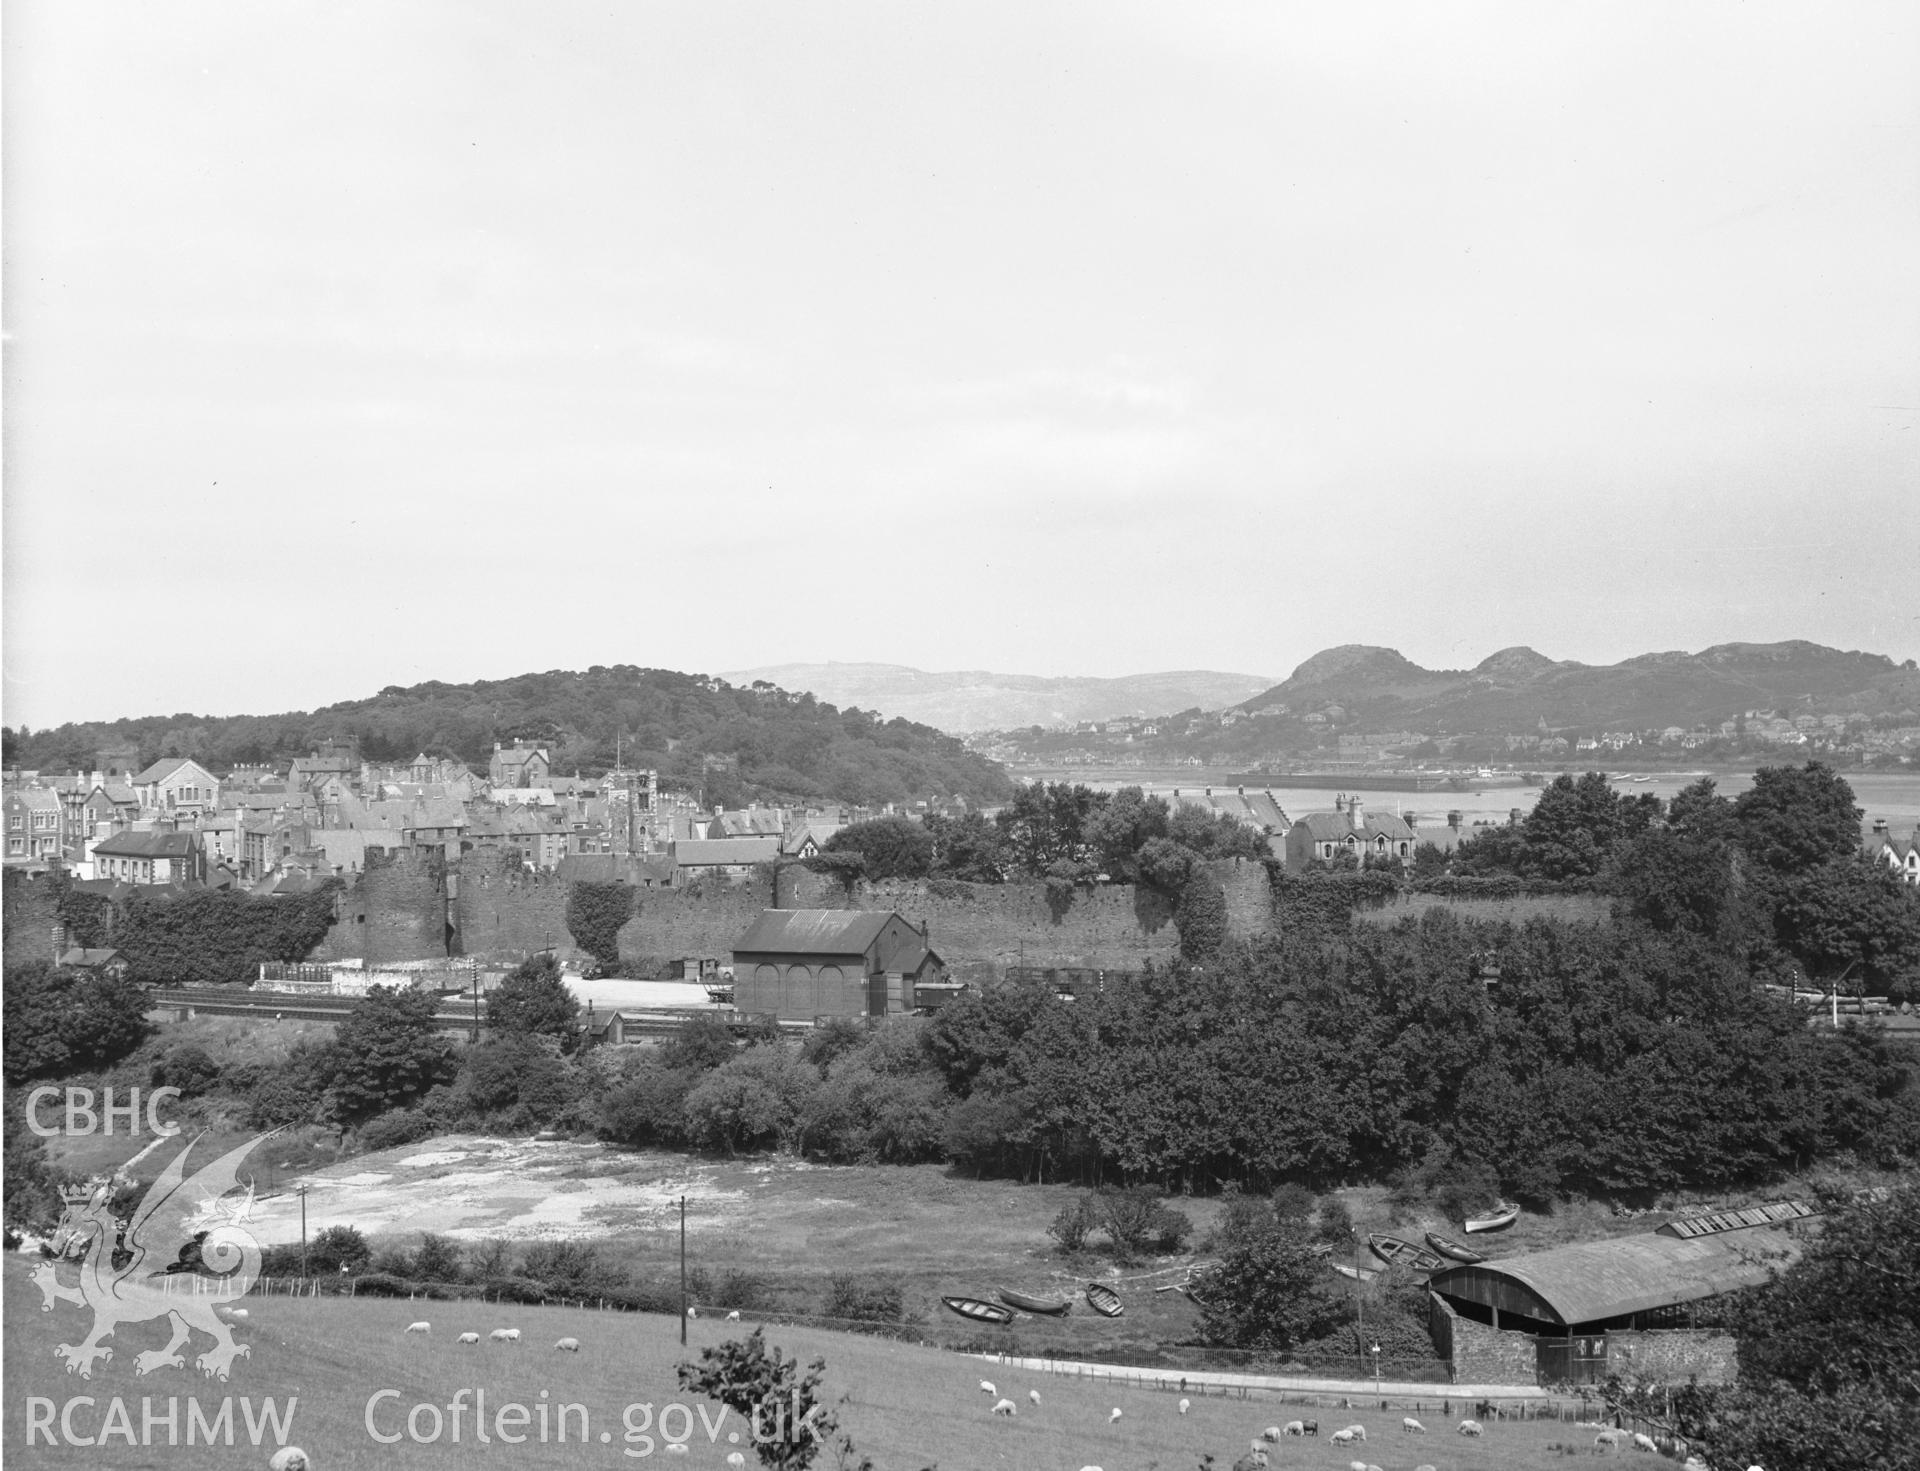 General view of Conwy Castle and Town, taken in 11.01.1952.